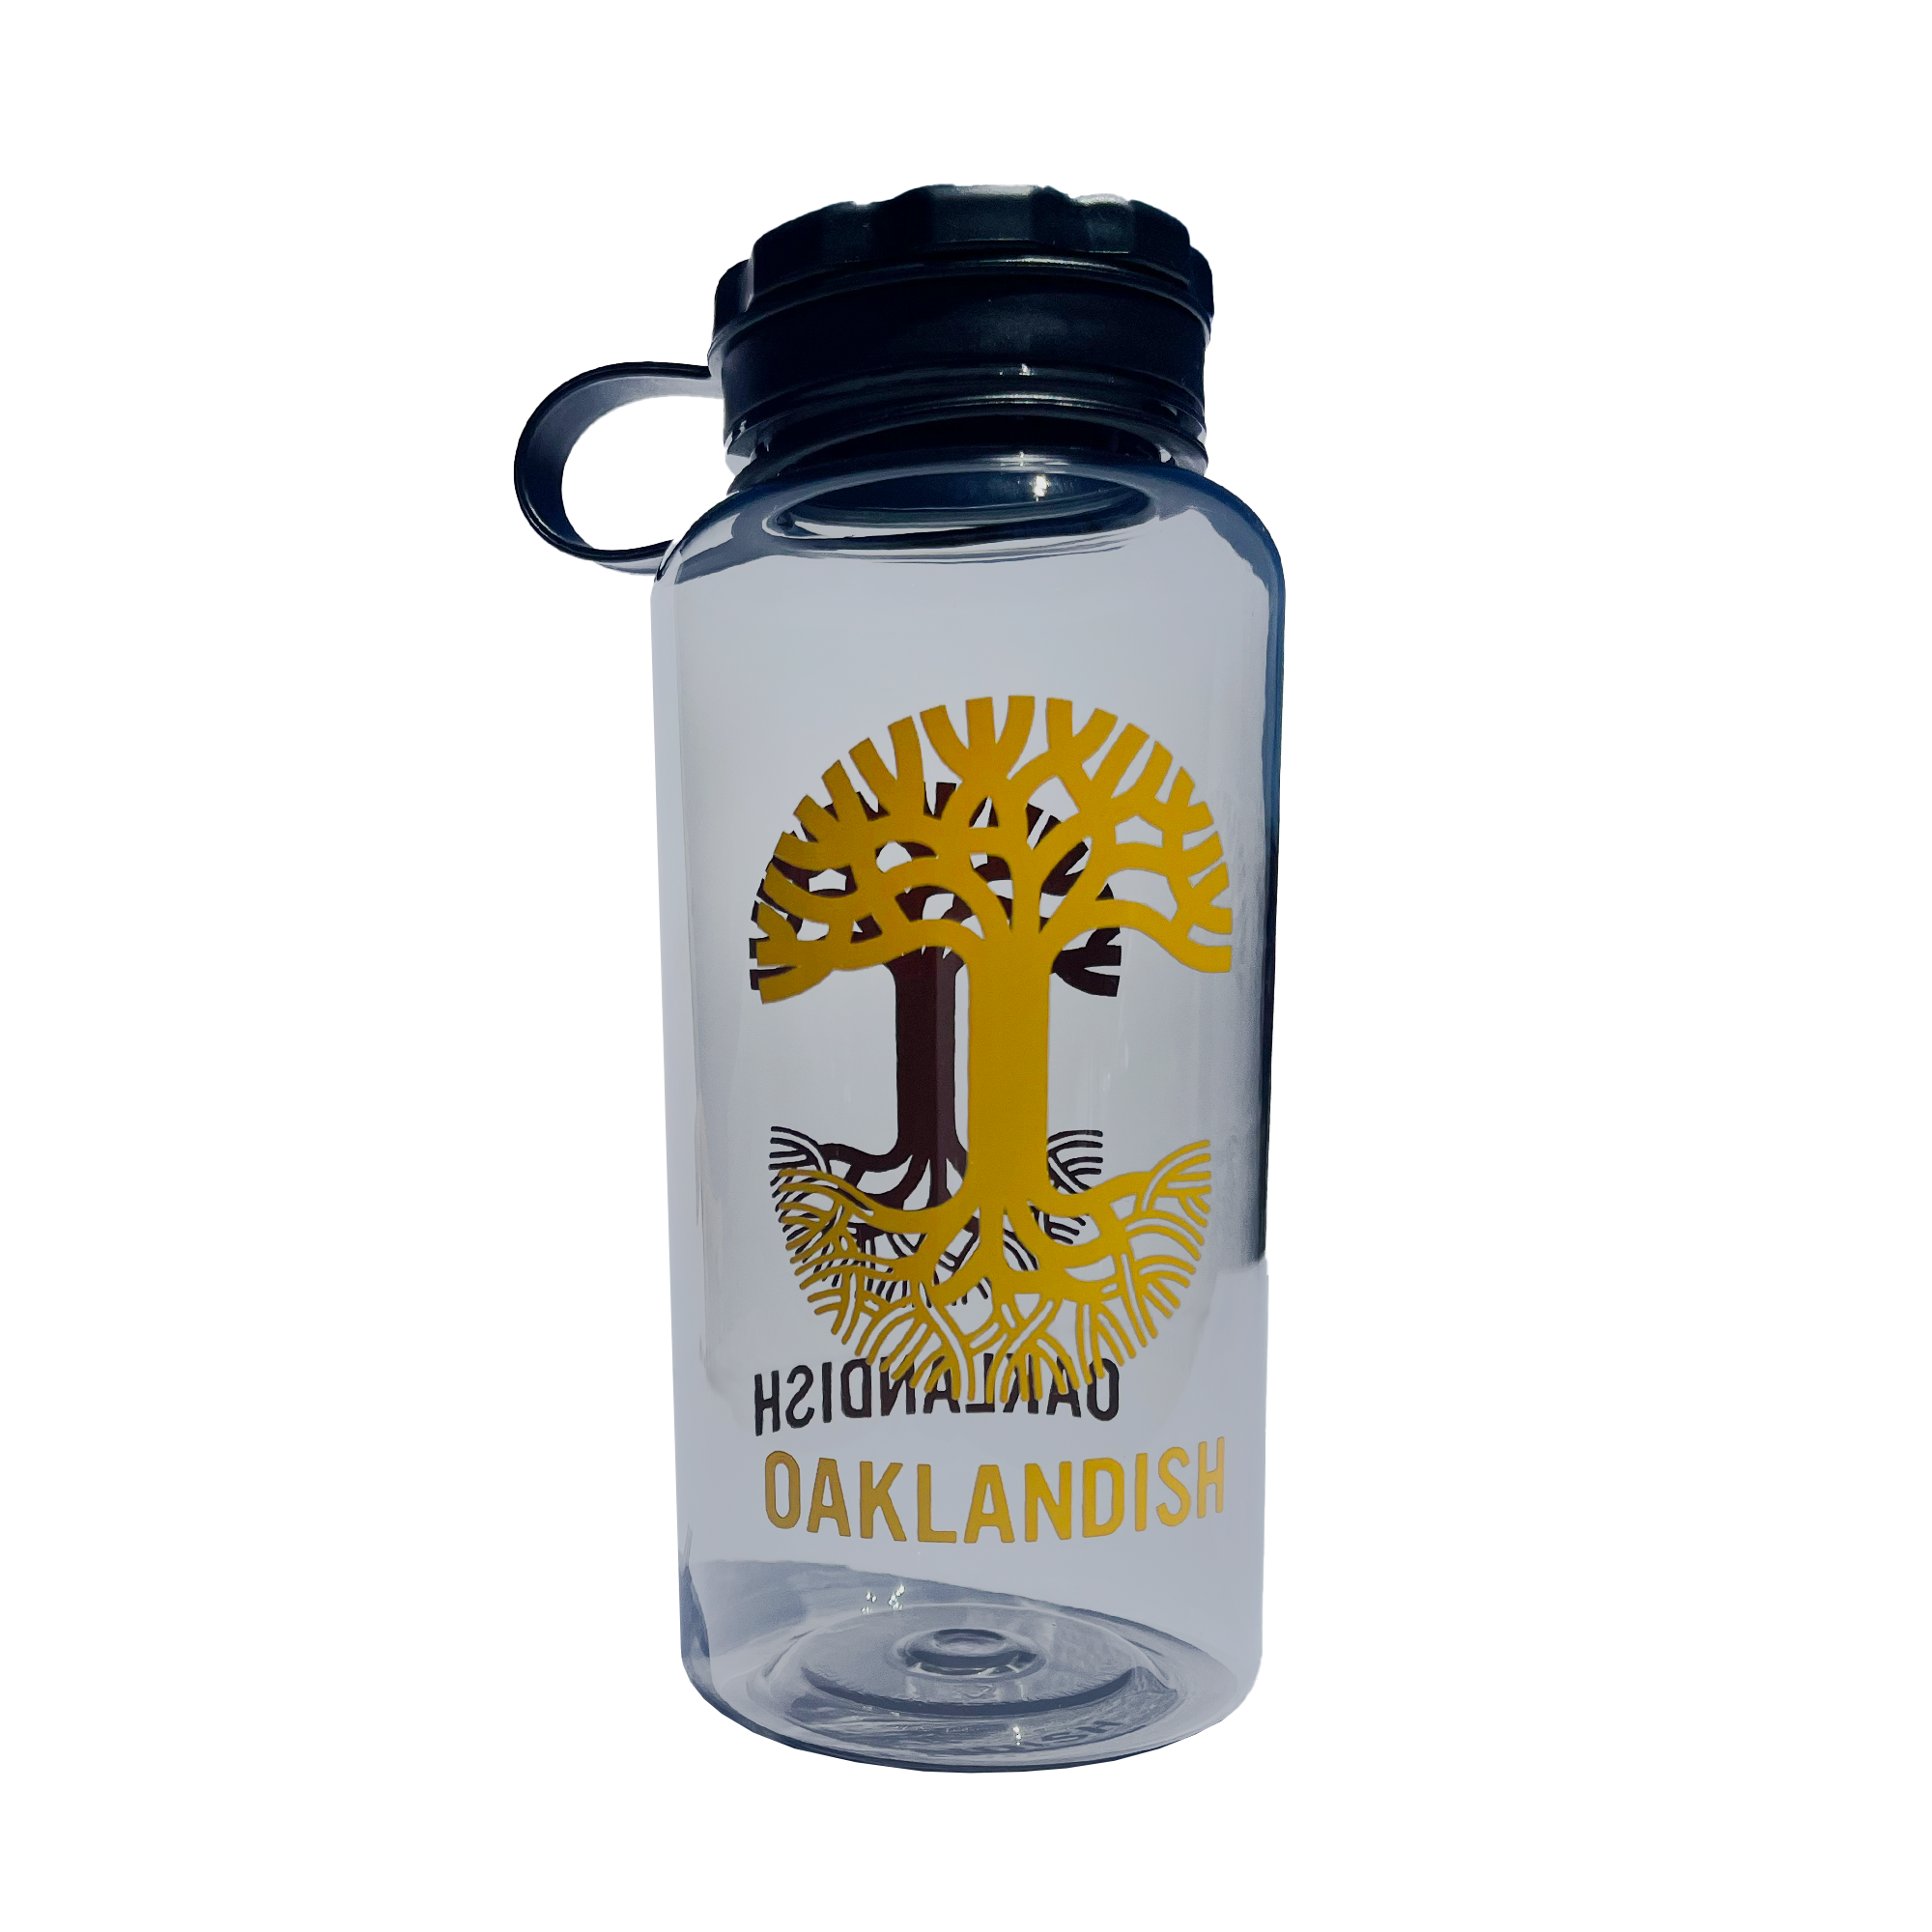 Translucent grey water bottle with scre-on black lid with yello Oaklandish tree logo and text, slightly tilted